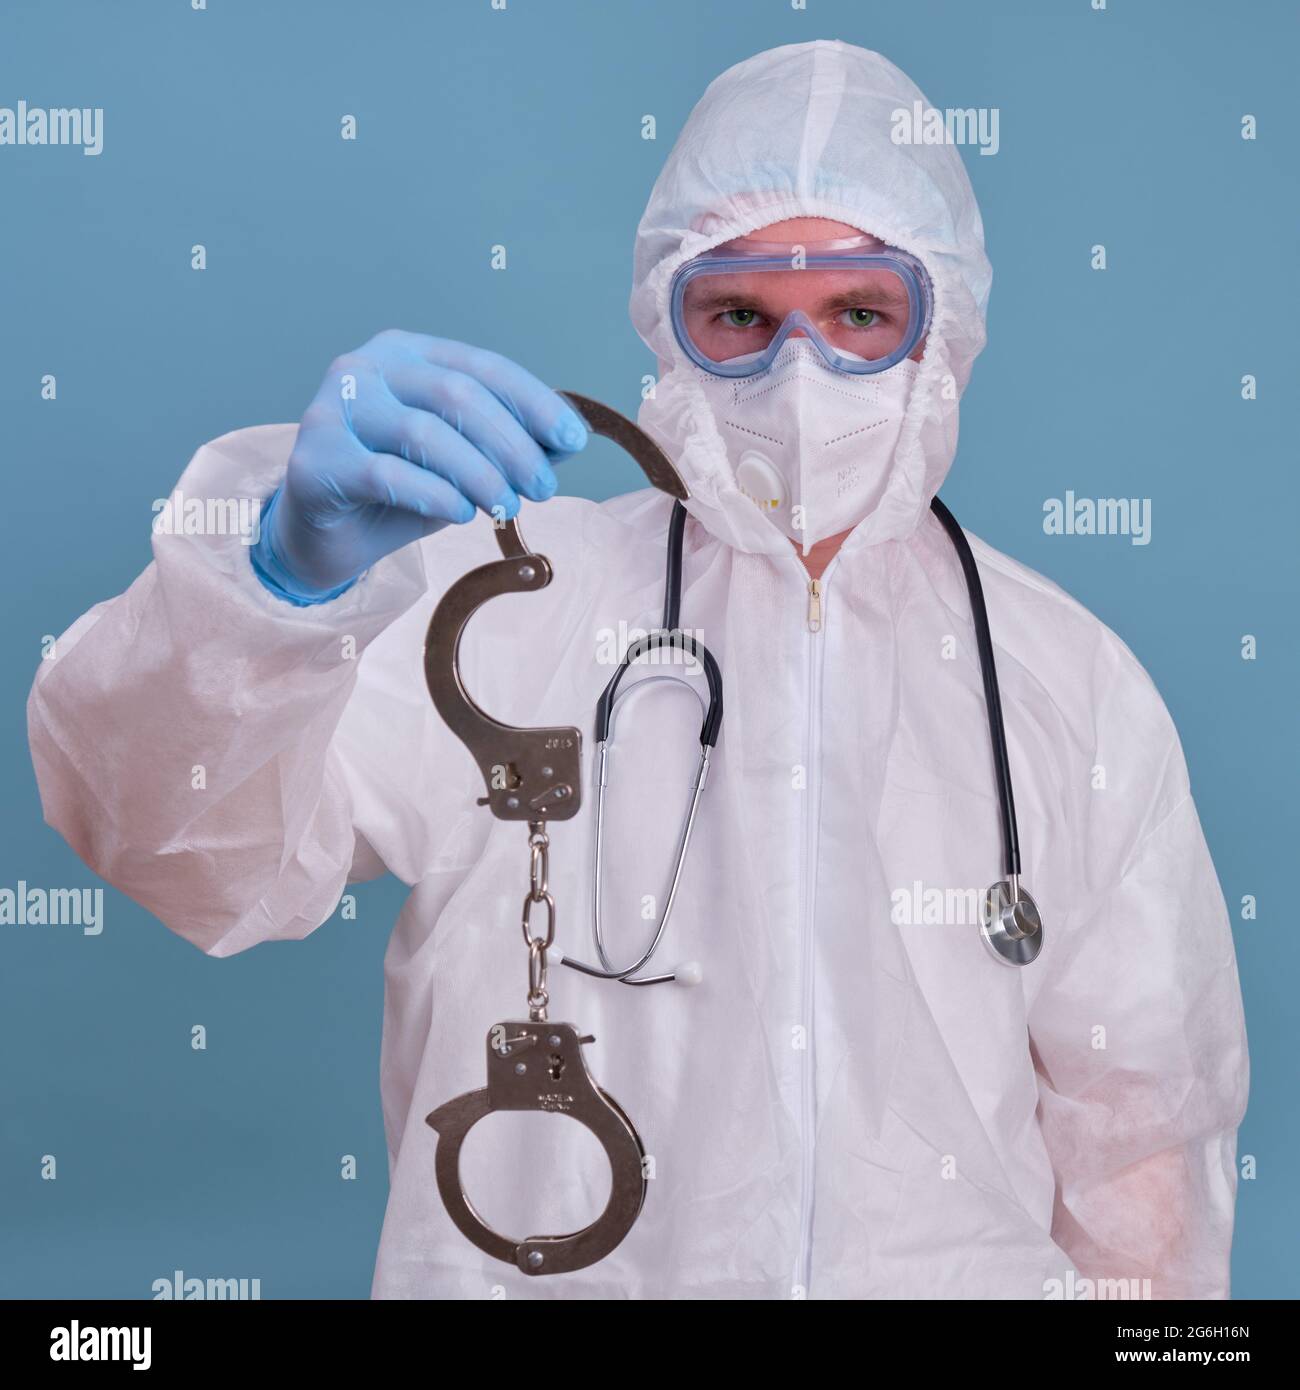 A doctor in a white uniform wearing a medical face mask with handcuffs in his hands Stock Photo